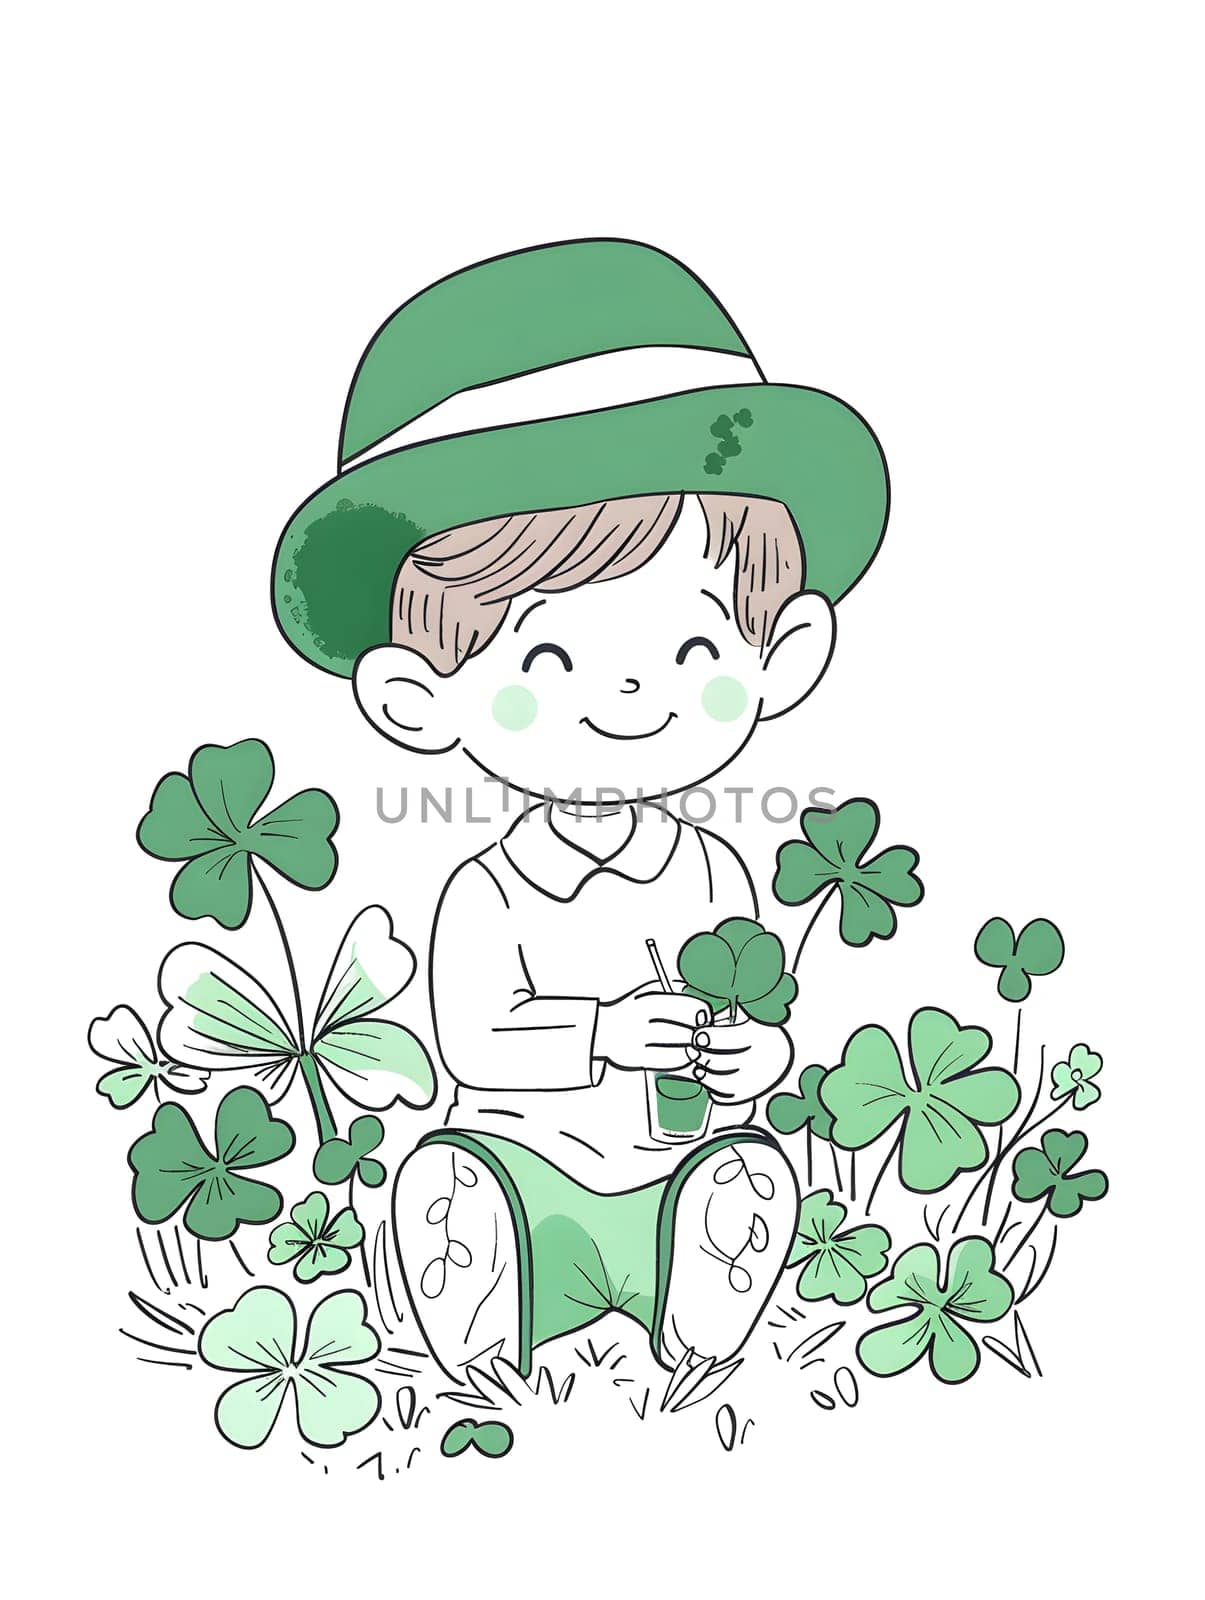 A happy boy in a green hat is sitting among plants and flowers in a field of clovers, surrounded by lush green grass